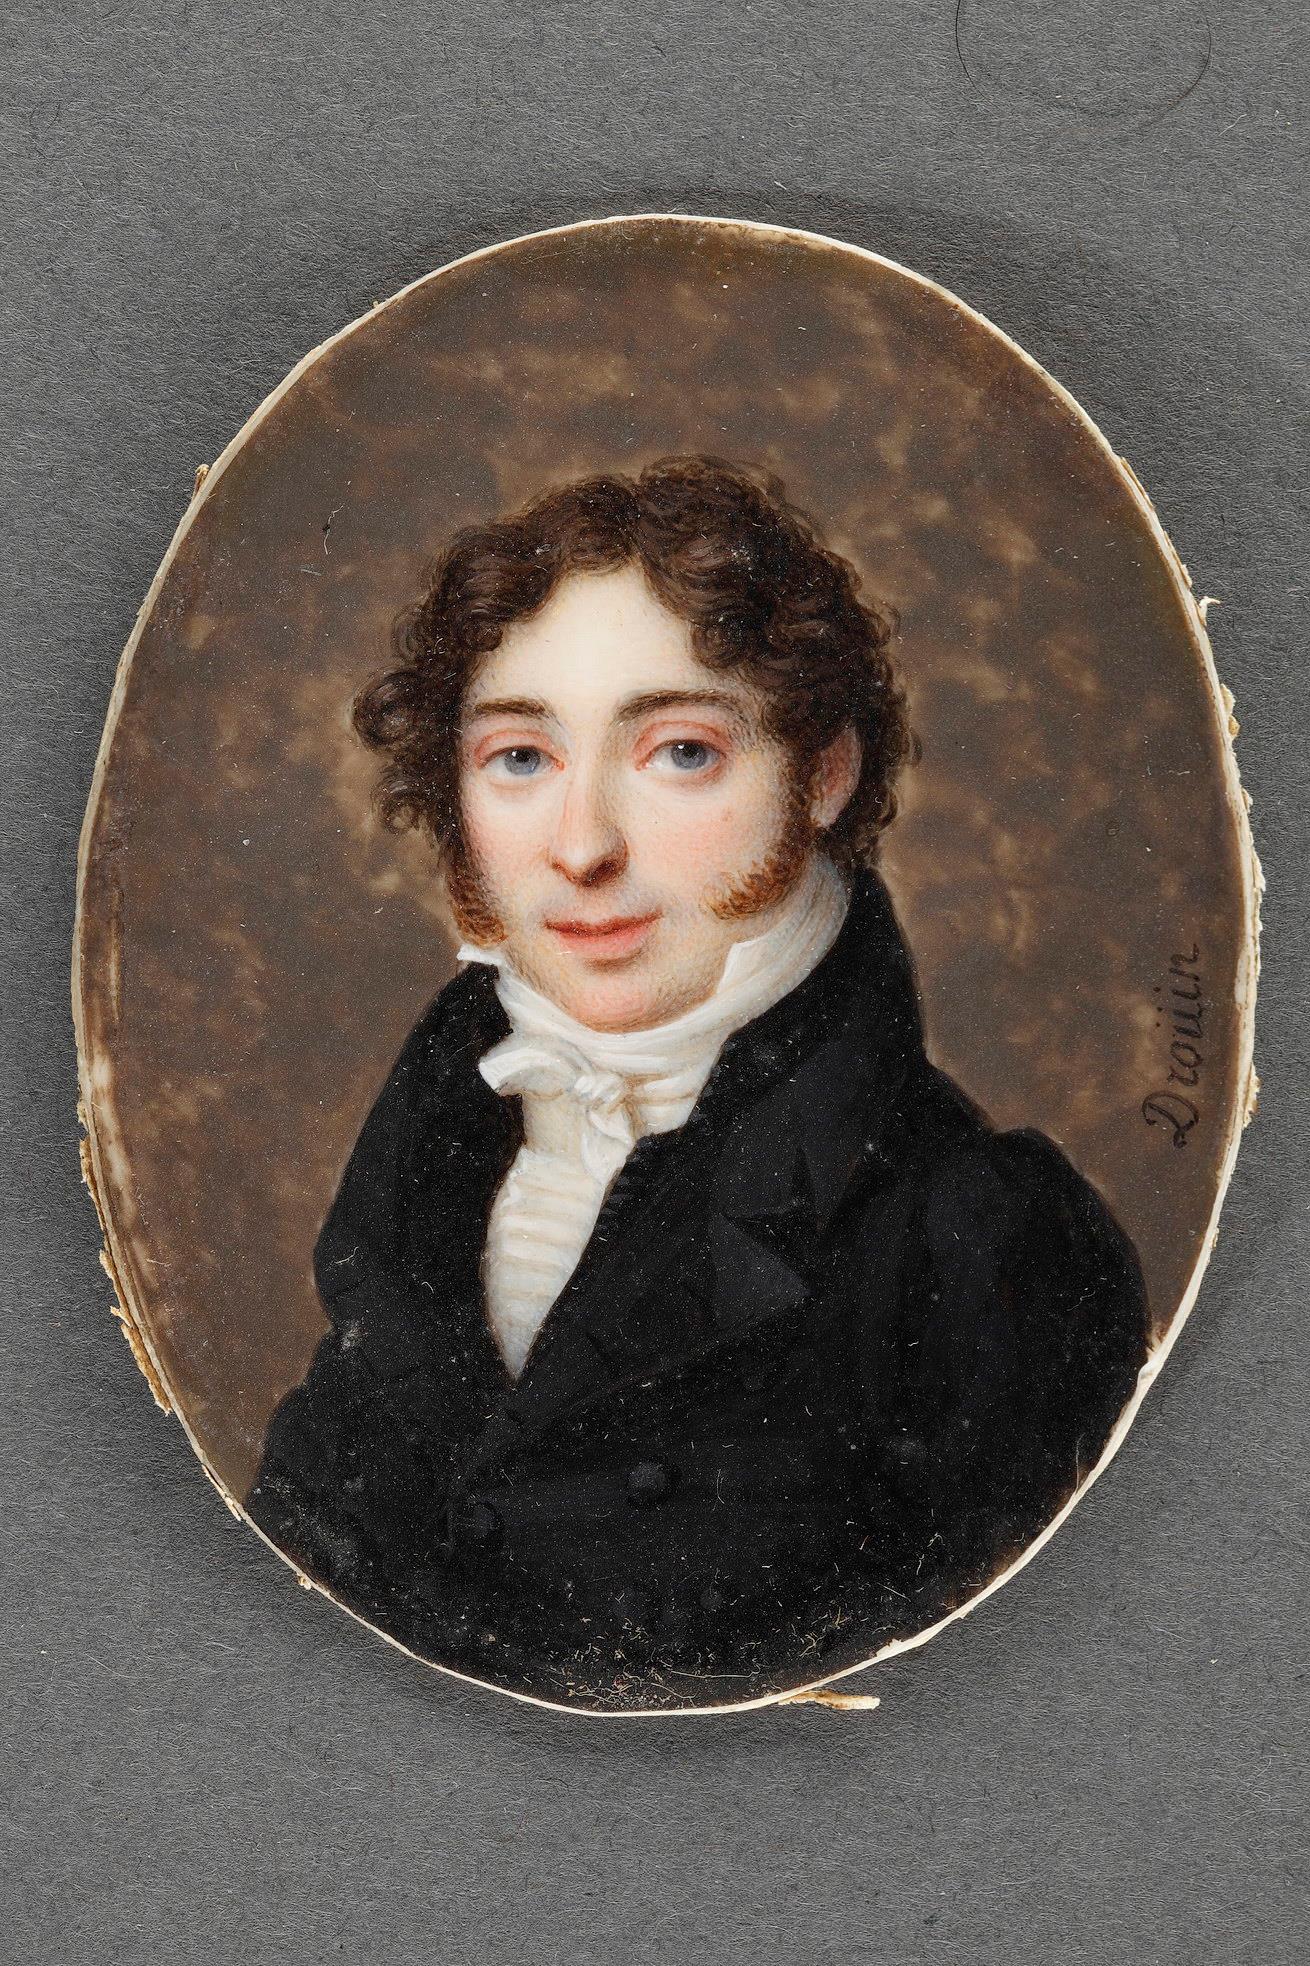 Early 19th century portrait on ivory. Signed DROUIN.